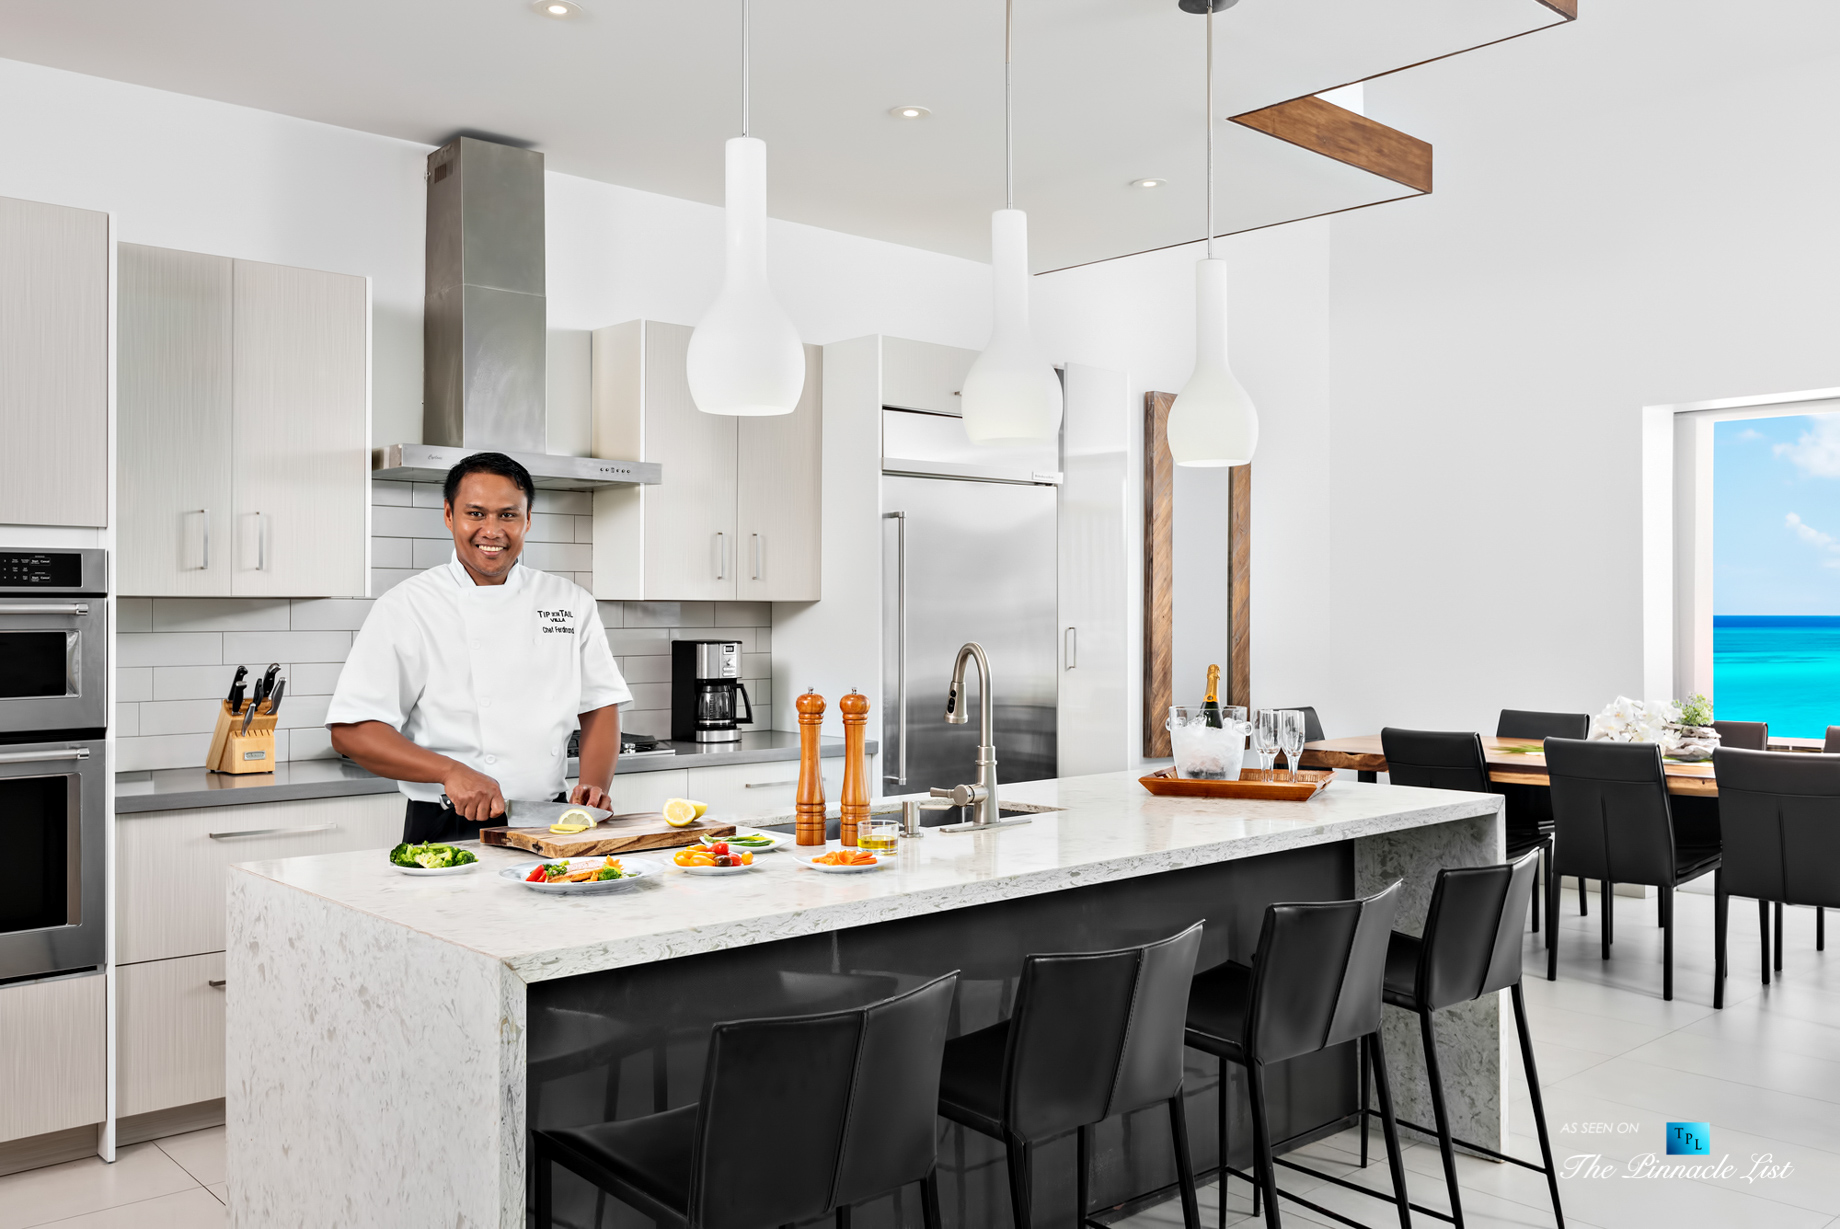 Tip of the Tail Villa – Providenciales, Turks and Caicos Islands – Caribbean House Kitchen with Chef – Luxury Real Estate – South Shore Peninsula Home